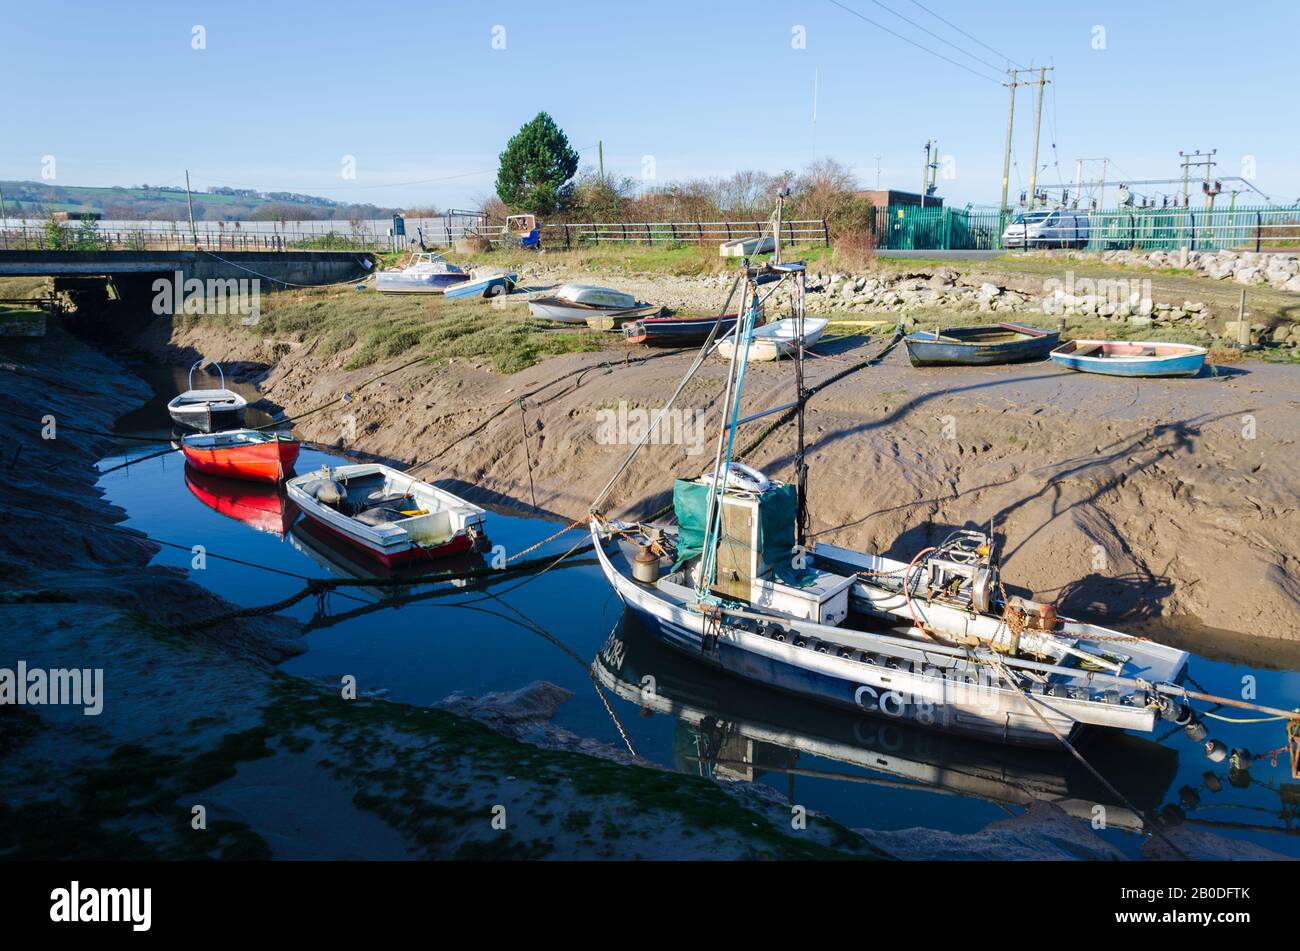 Greenfield, Flintshire, UK: Feb 6, 2020: During July to December, Greenfield Dock is where local fishermen land their catches of cockles. The North Wa Stock Photo